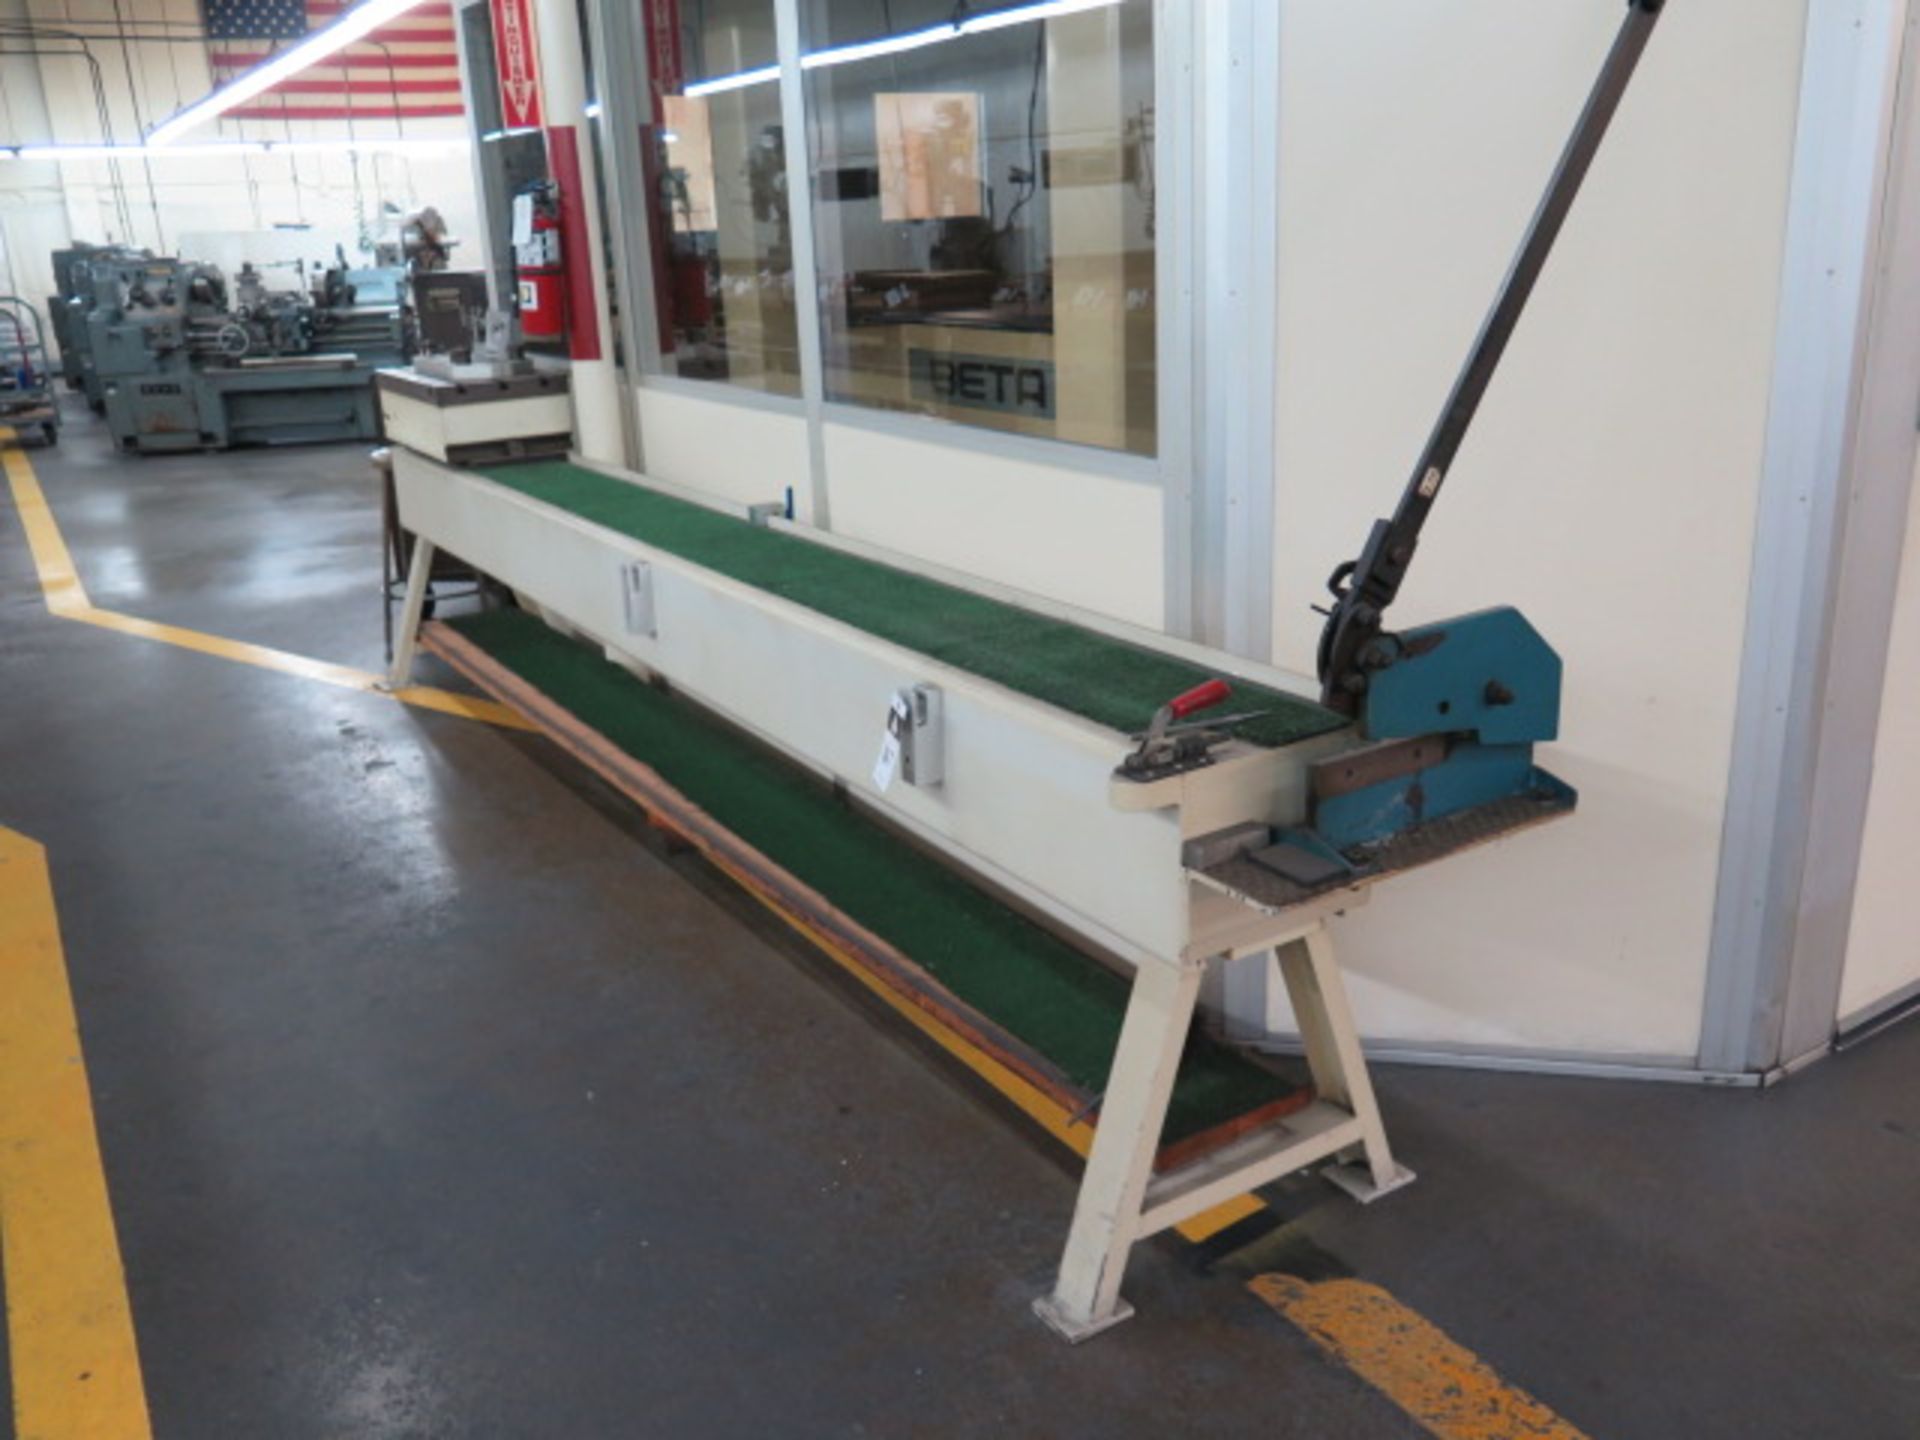 13' Custom 8" Shear Table w/ Elephant ESS-8 8" Hand Shear and 14" x 28" x 9" T=Slot Roser,SOLD AS IS - Image 3 of 6